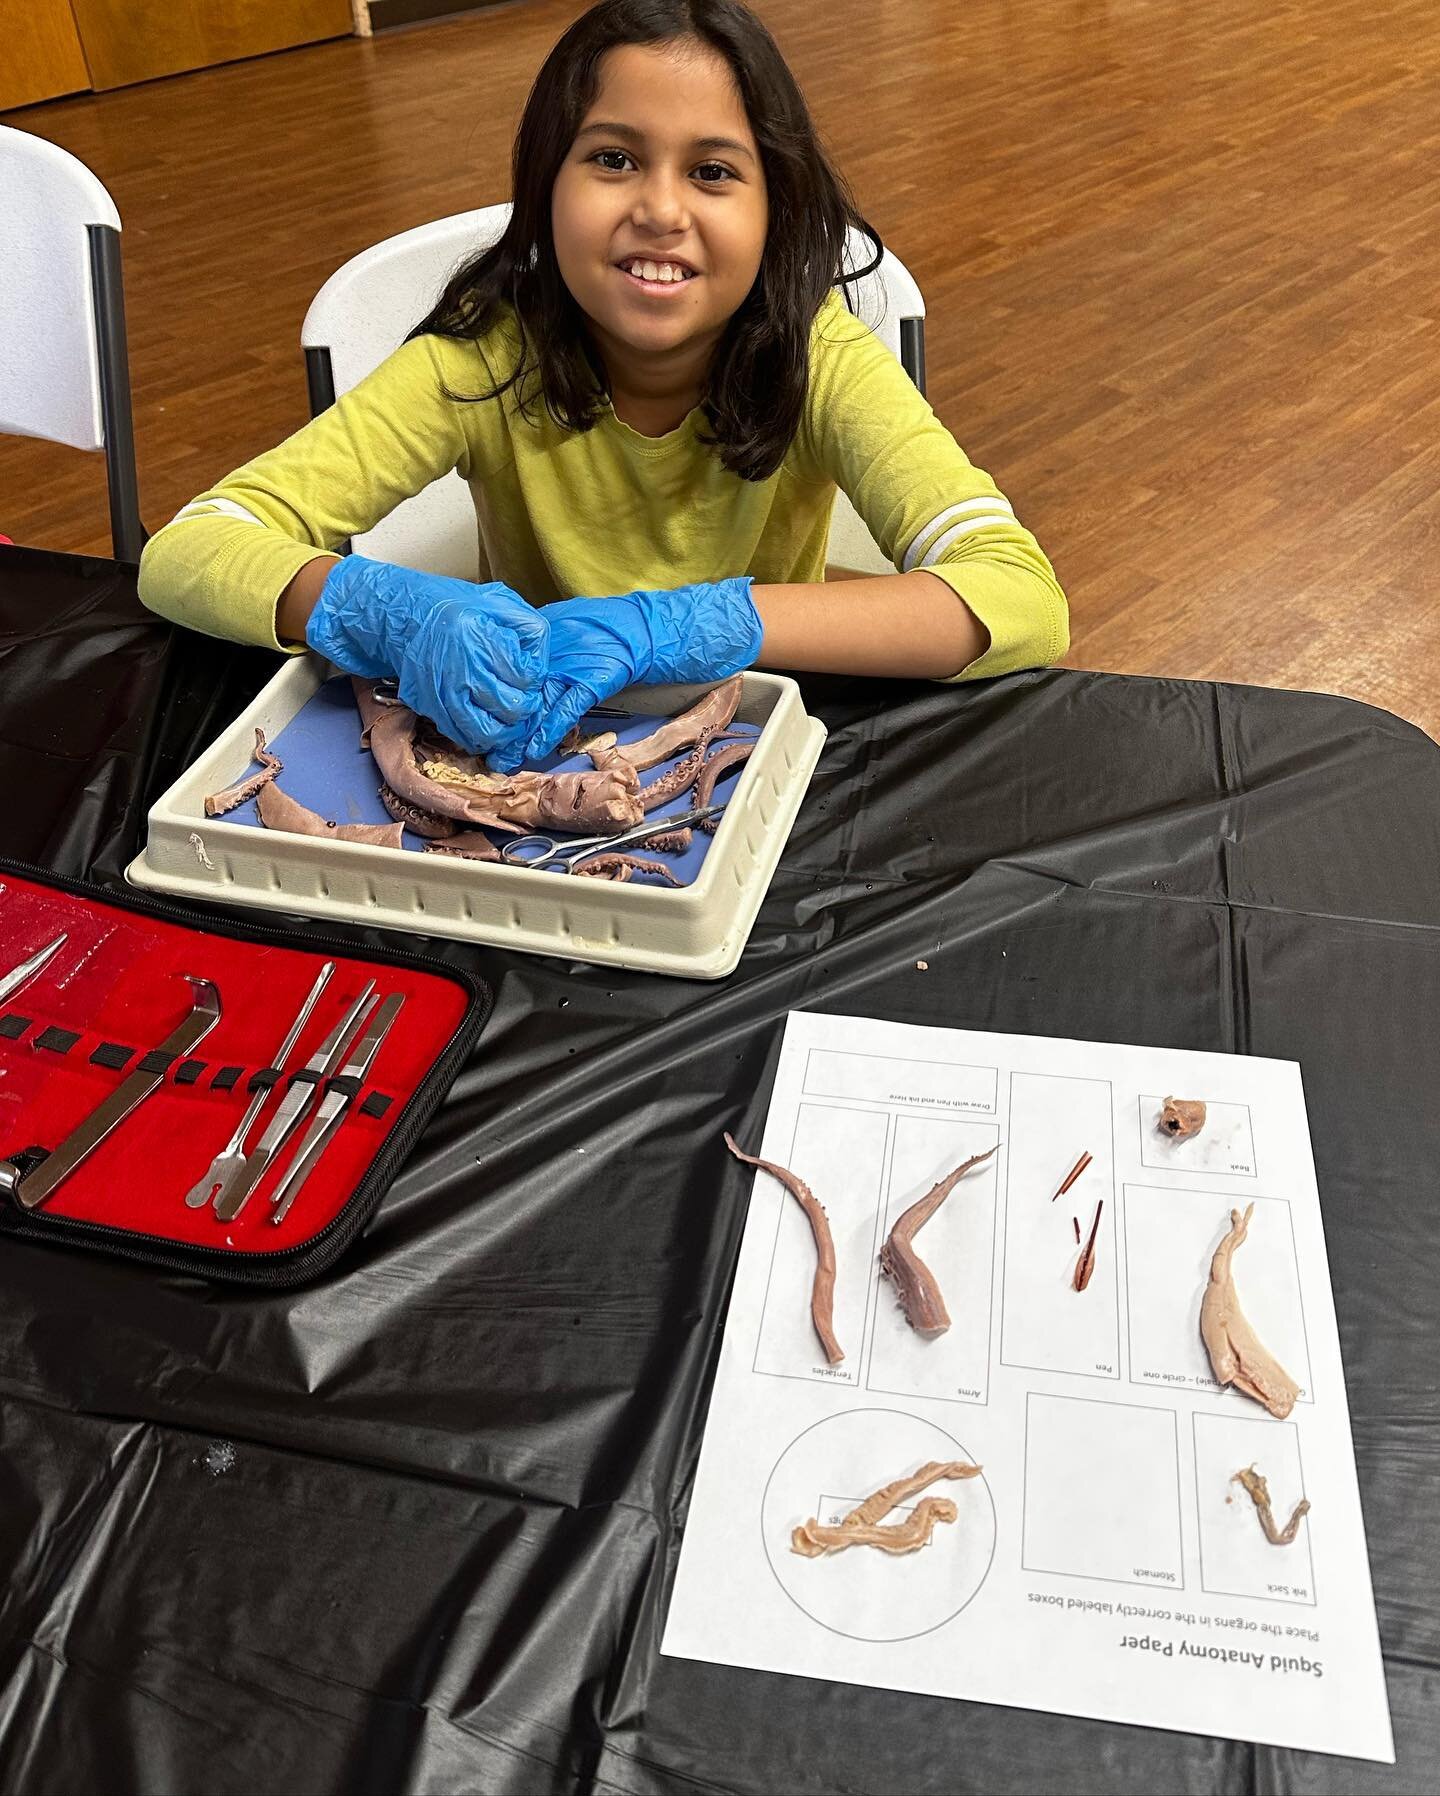 Invertebrates are so cool! Our squid dissection we saw an adaptation of a shell that is INSIDE the body and saw some pretty cool color changing chromatophores! 
#biologywithberta #homeschool #learningthroughplay #homeschooling  #childhoodunplugged #w